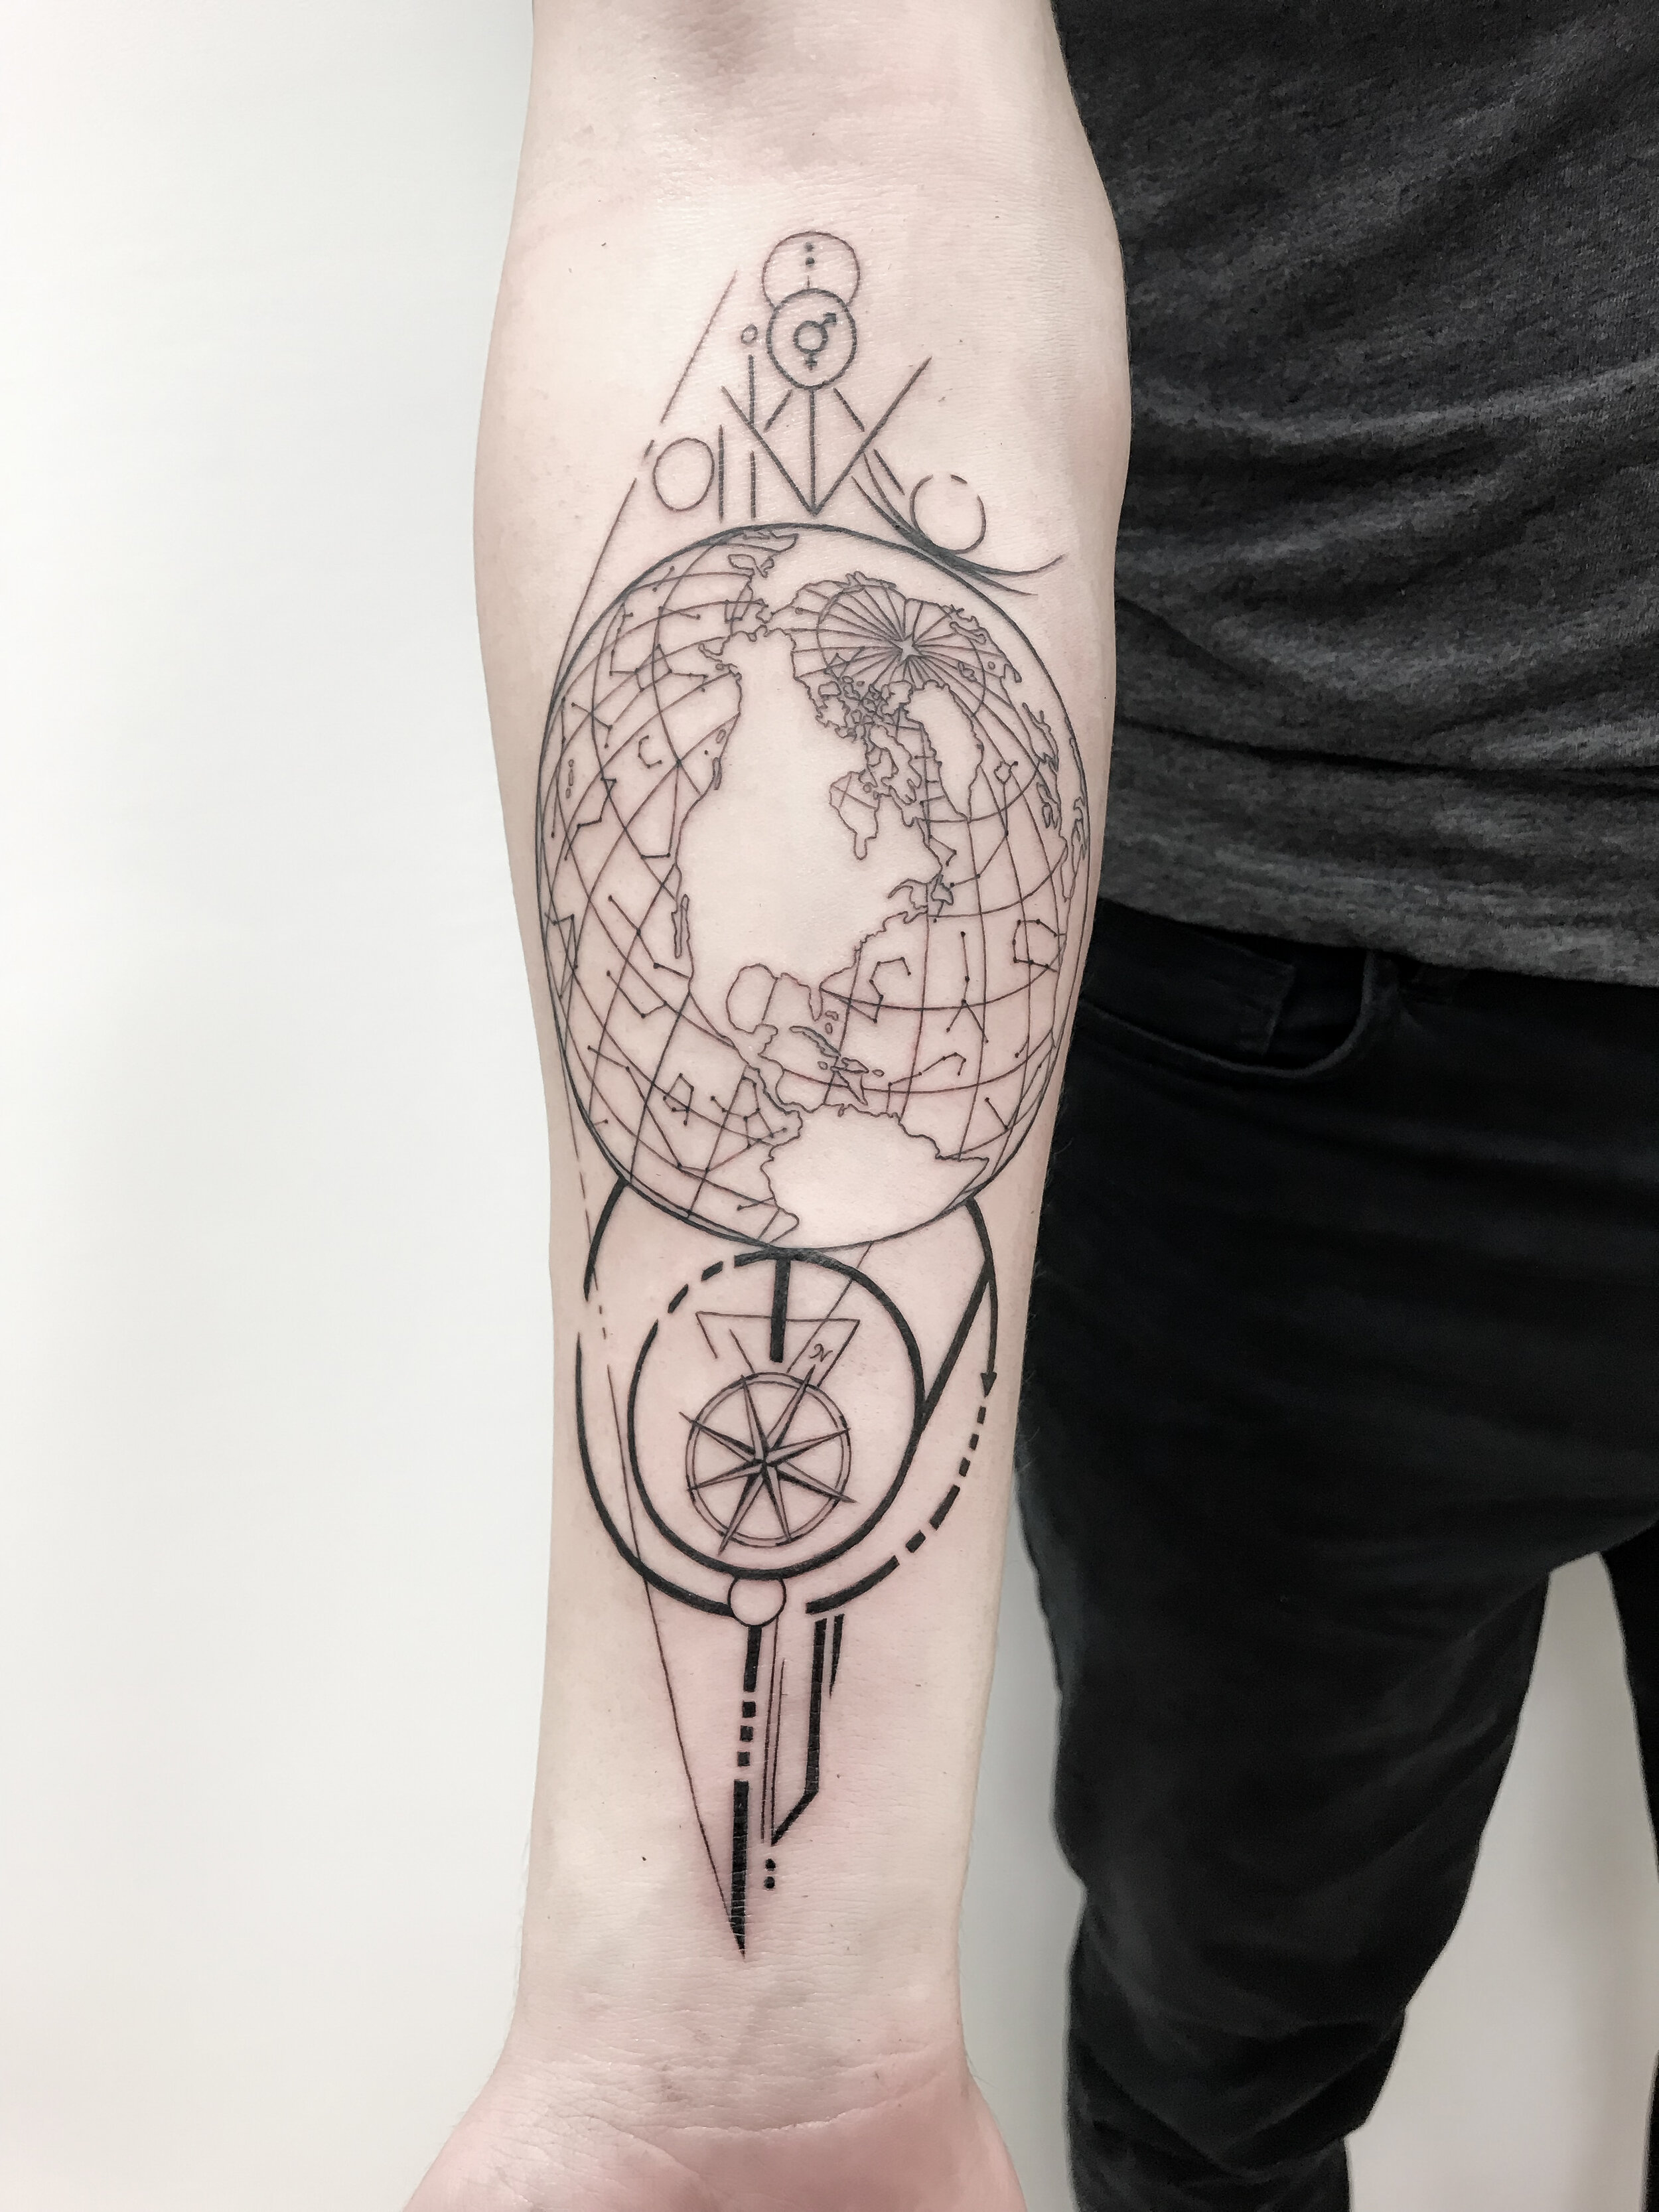 𝐓𝐫𝐢 tristanmainsontattoo  Instagram photos and videos